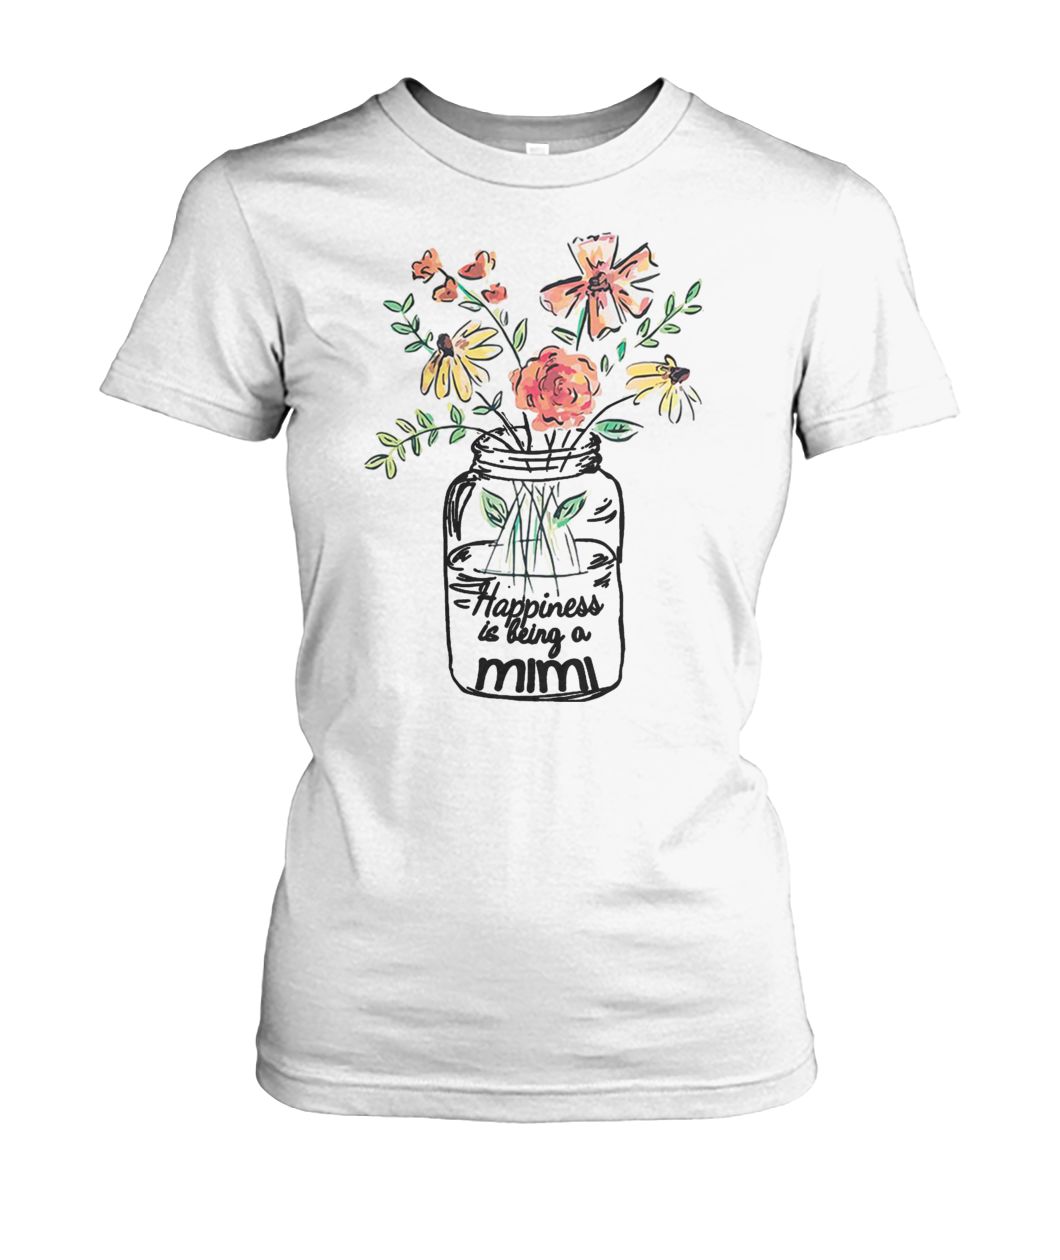 Flower happiness is being a mimi women's crew tee